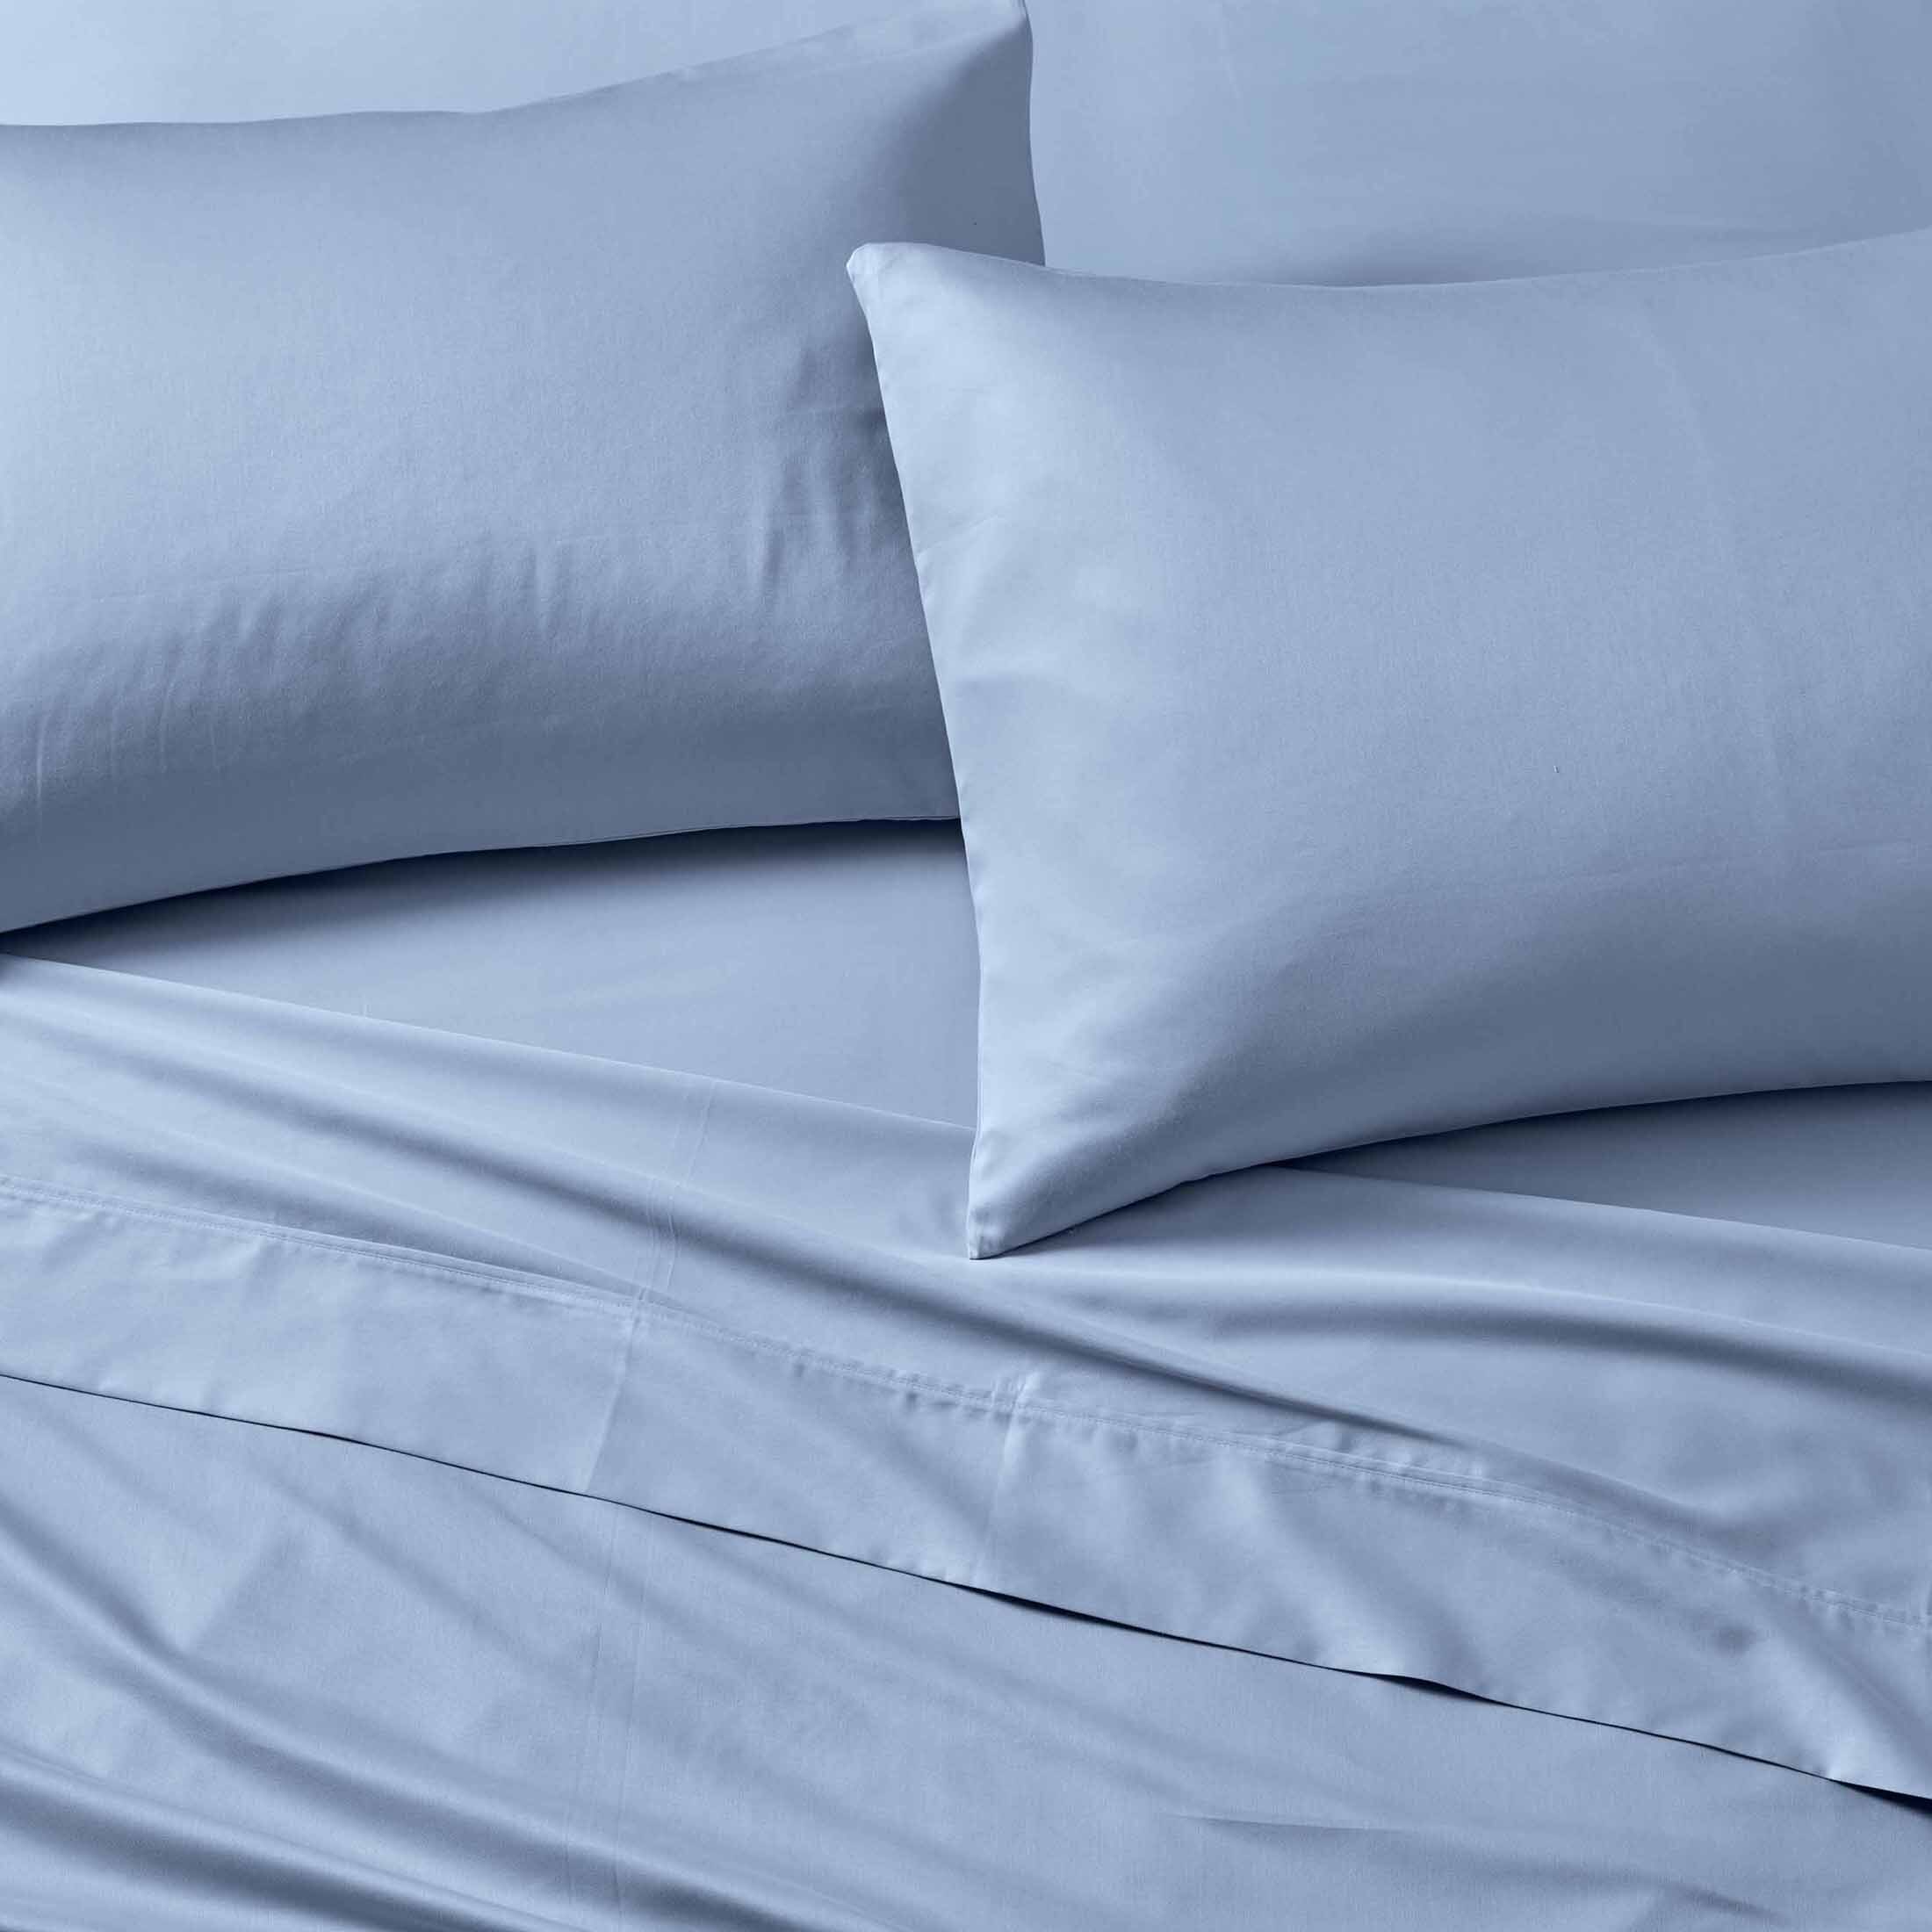 Better Homes & Gardens 100% Cotton Sateen 300 Thread Count Sheet Set, Full, Blue Water - image 2 of 6